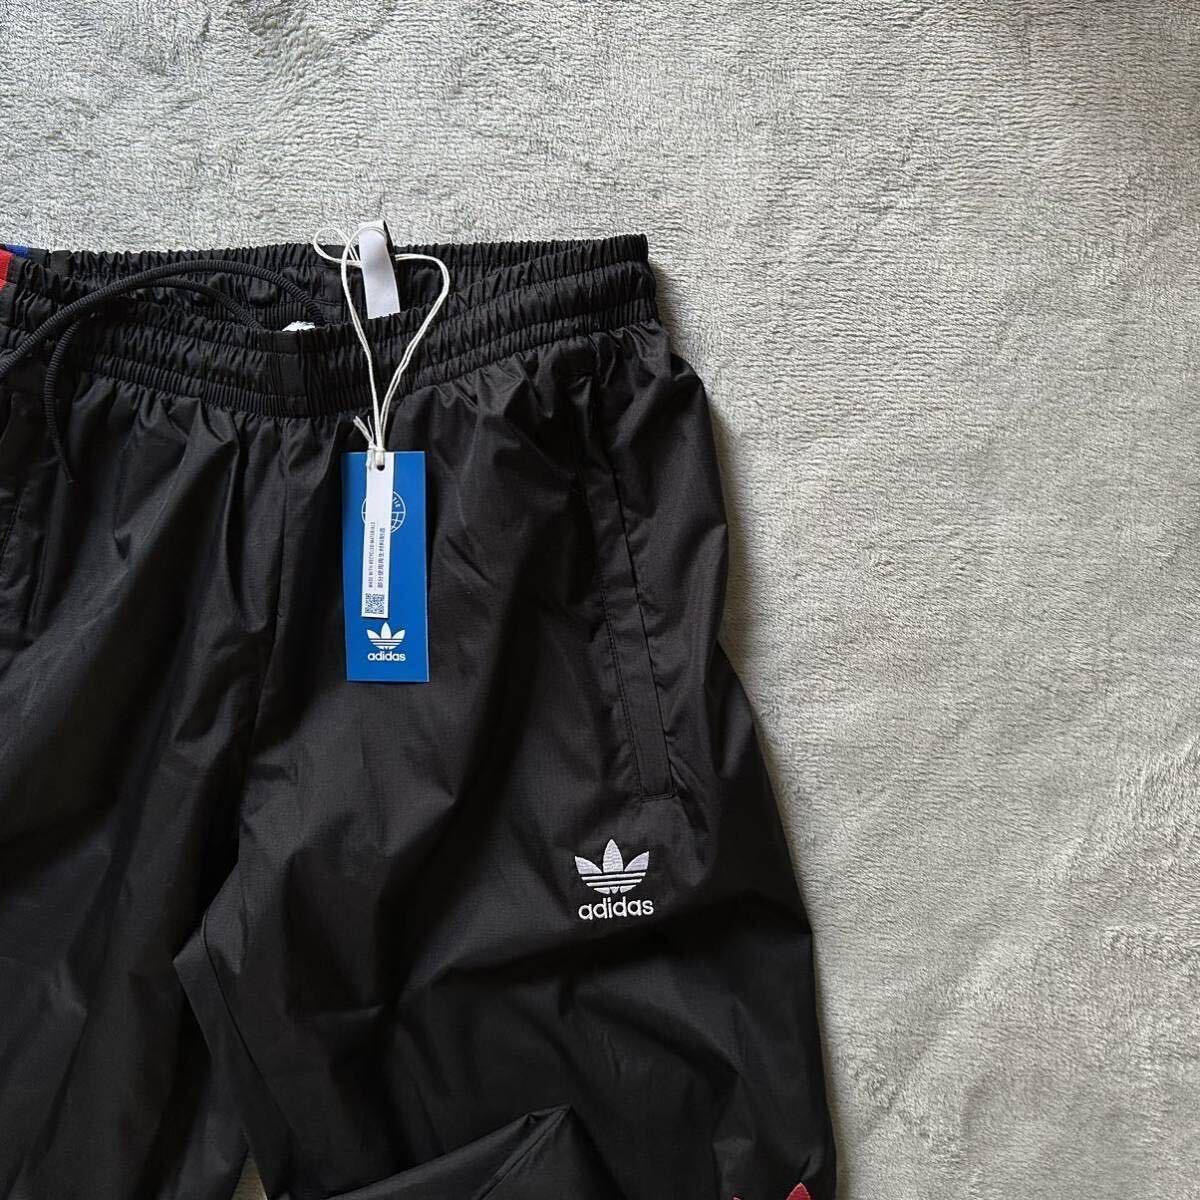  cheap postage L size new goods adidas originals Adidas Originals to ref . il truck pants nylon black red black red aGE0839